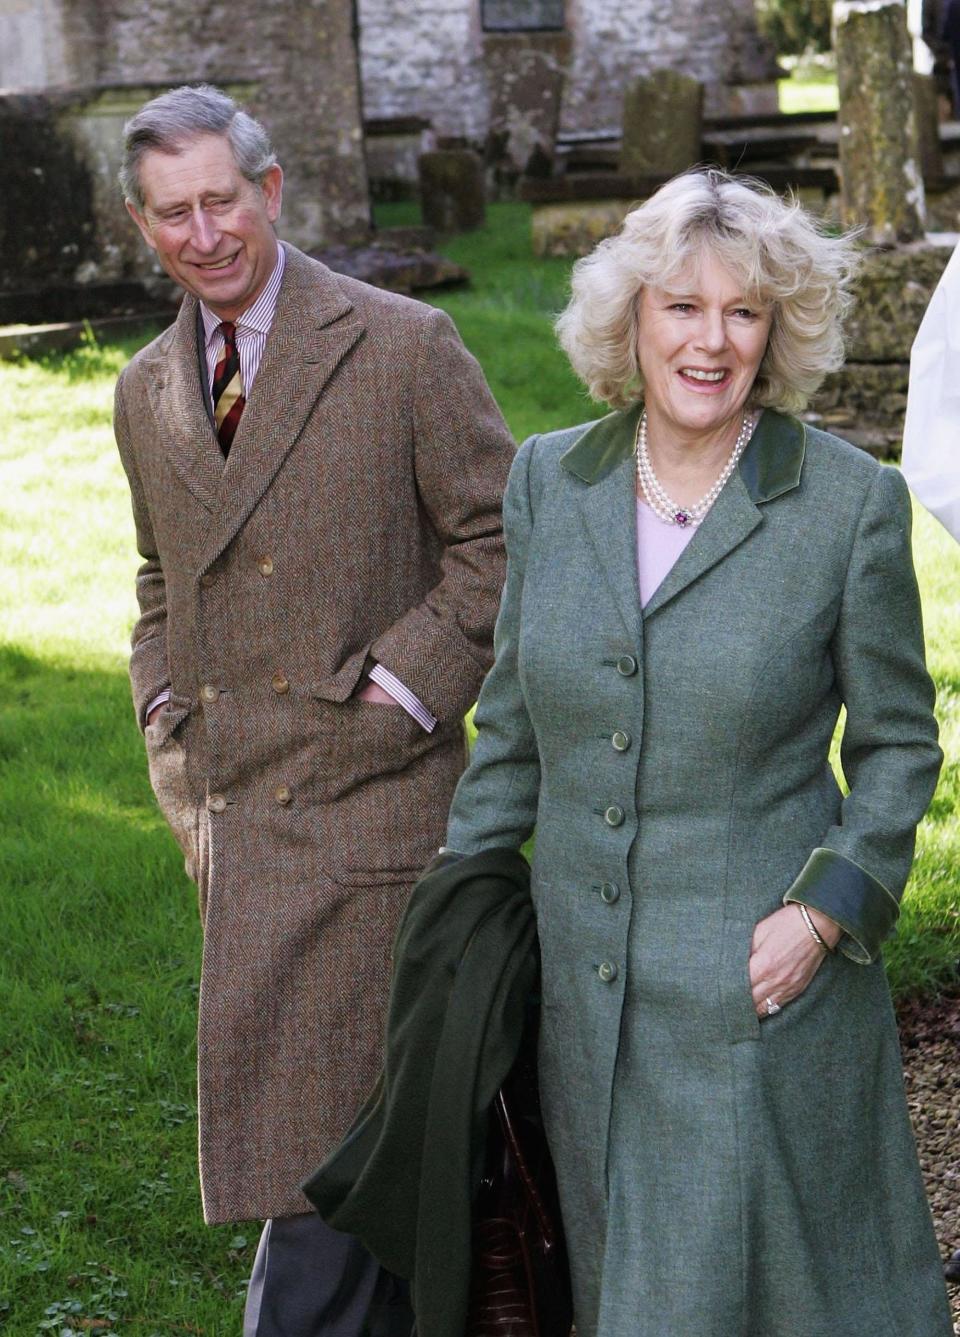 King Charles III and Camilla, Queen Consort walk through a field.